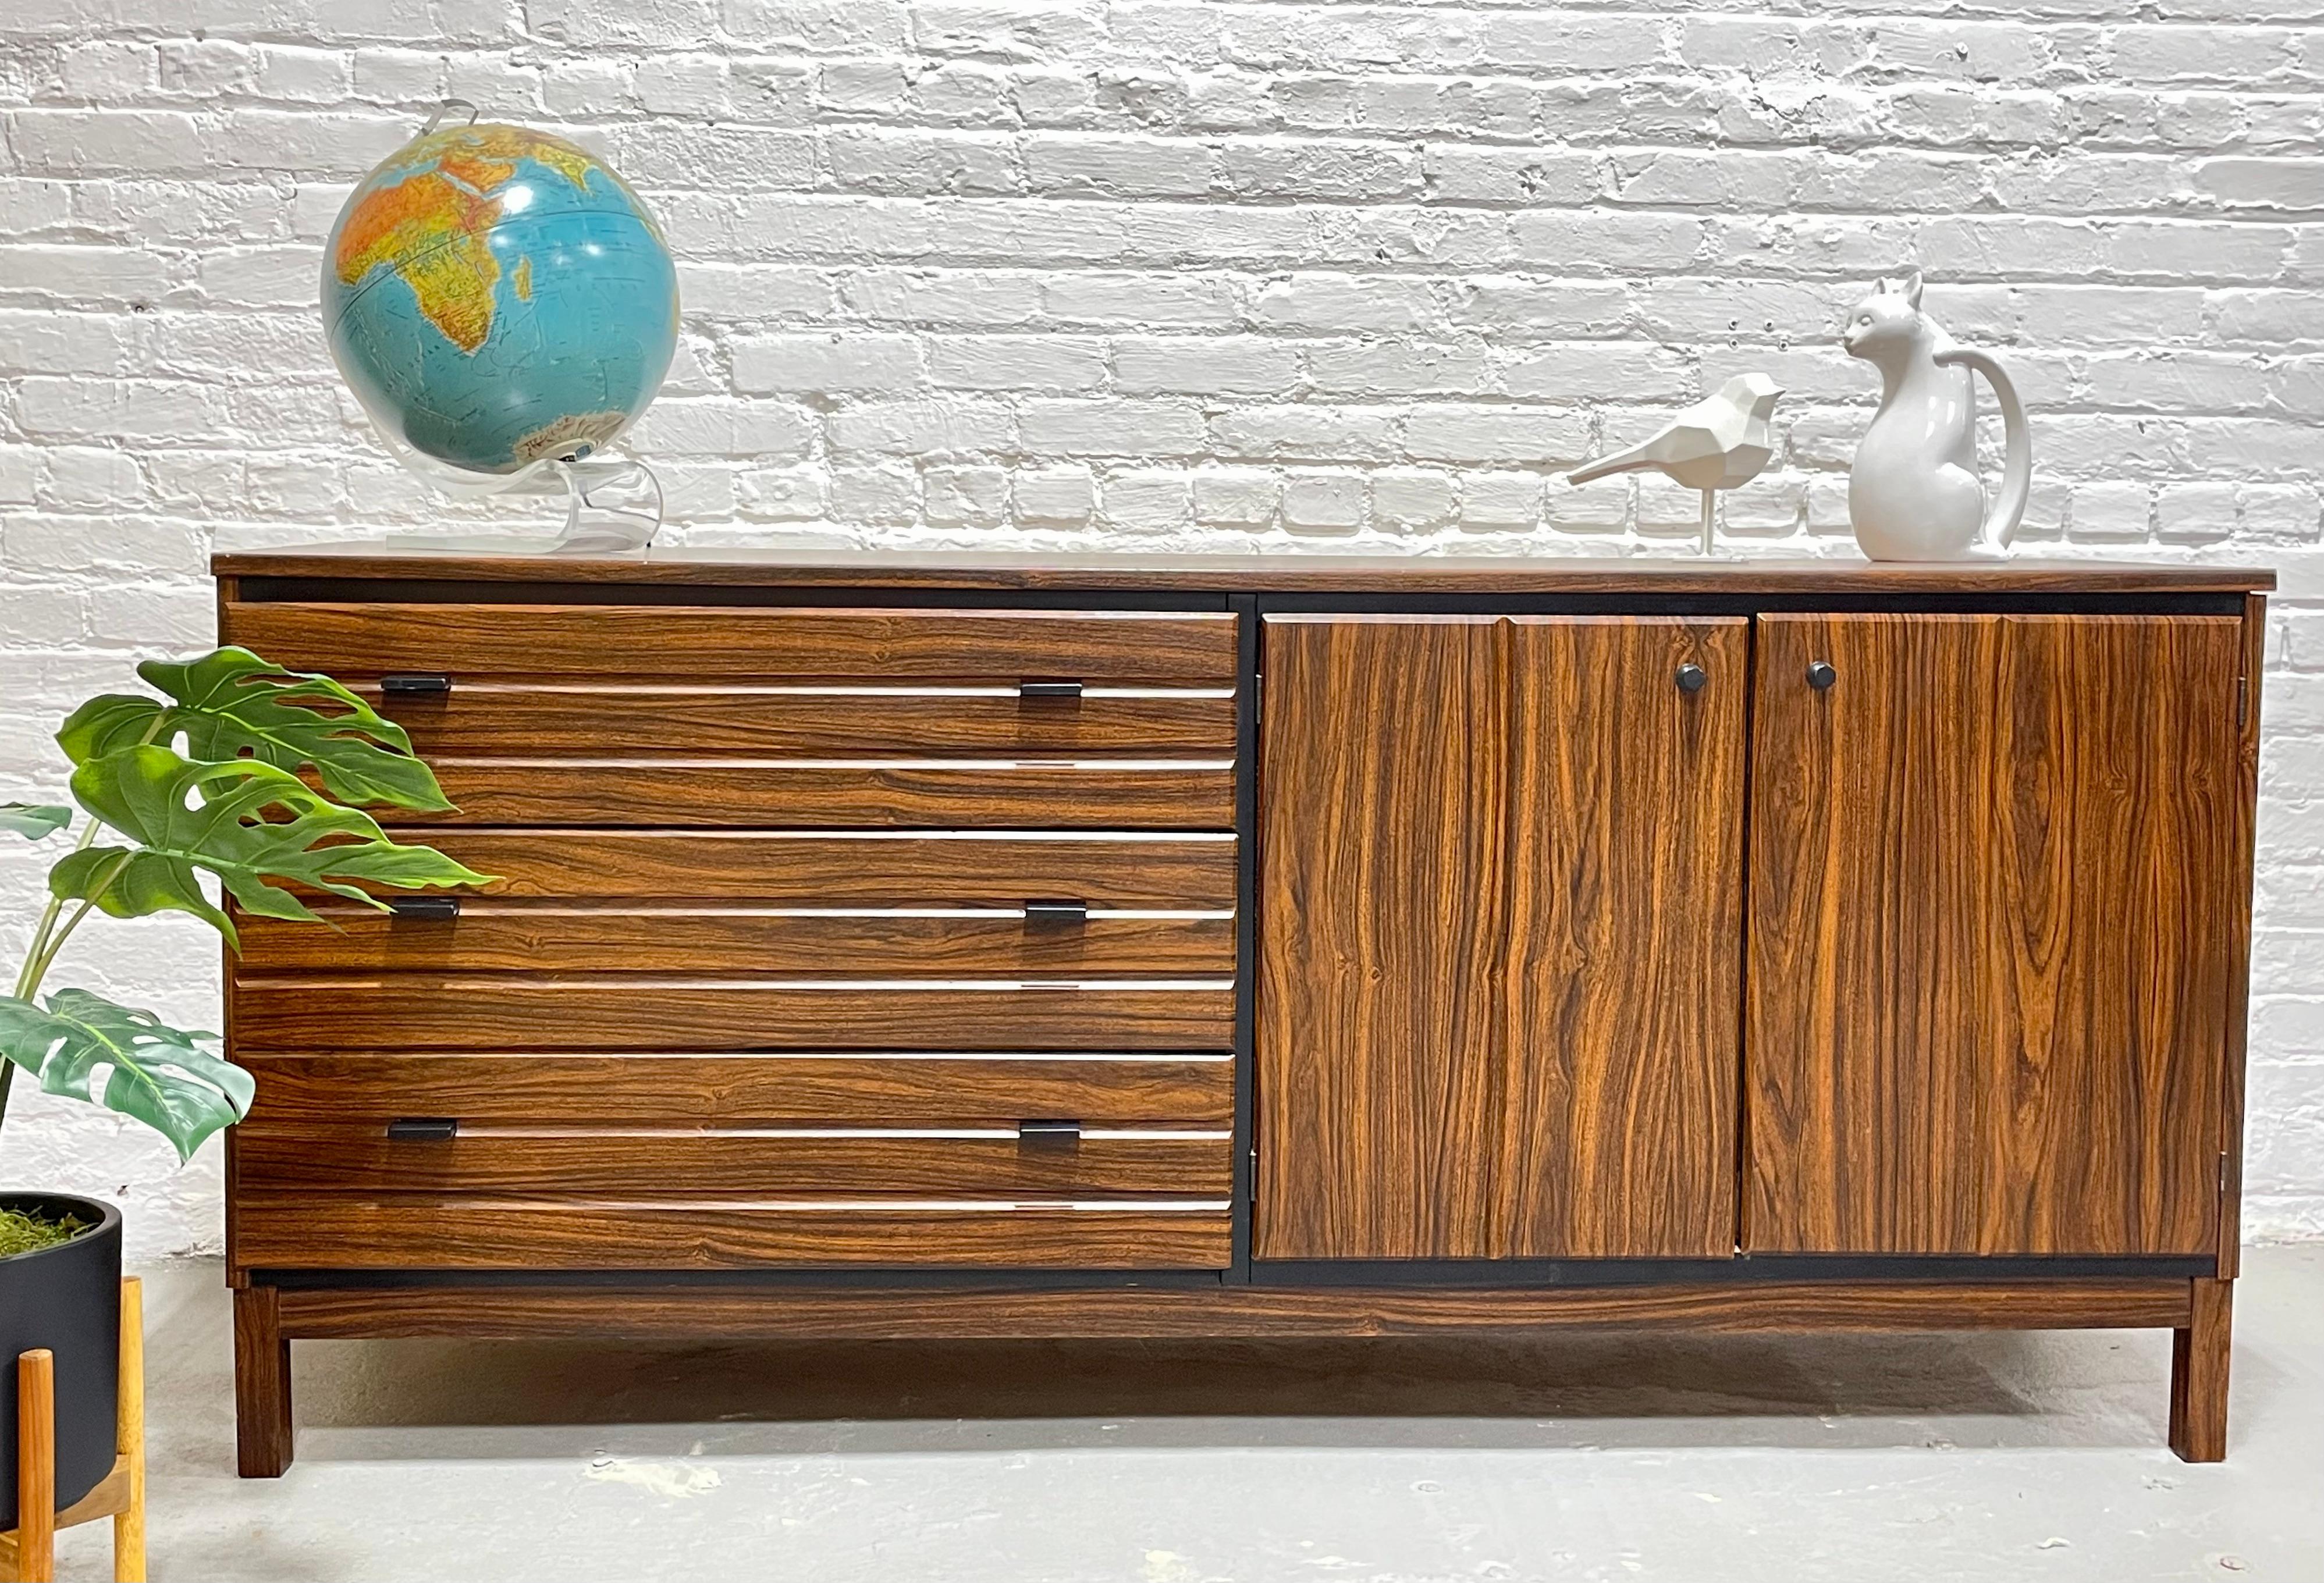 Mid Century Modern Long Dresser / Credenza by American of Martinsville, a solid American manufacturer known for their superb quality, c. 1960's. This long dresser offers loads of storage space over a total of 6 wide and spacious drawers.  The